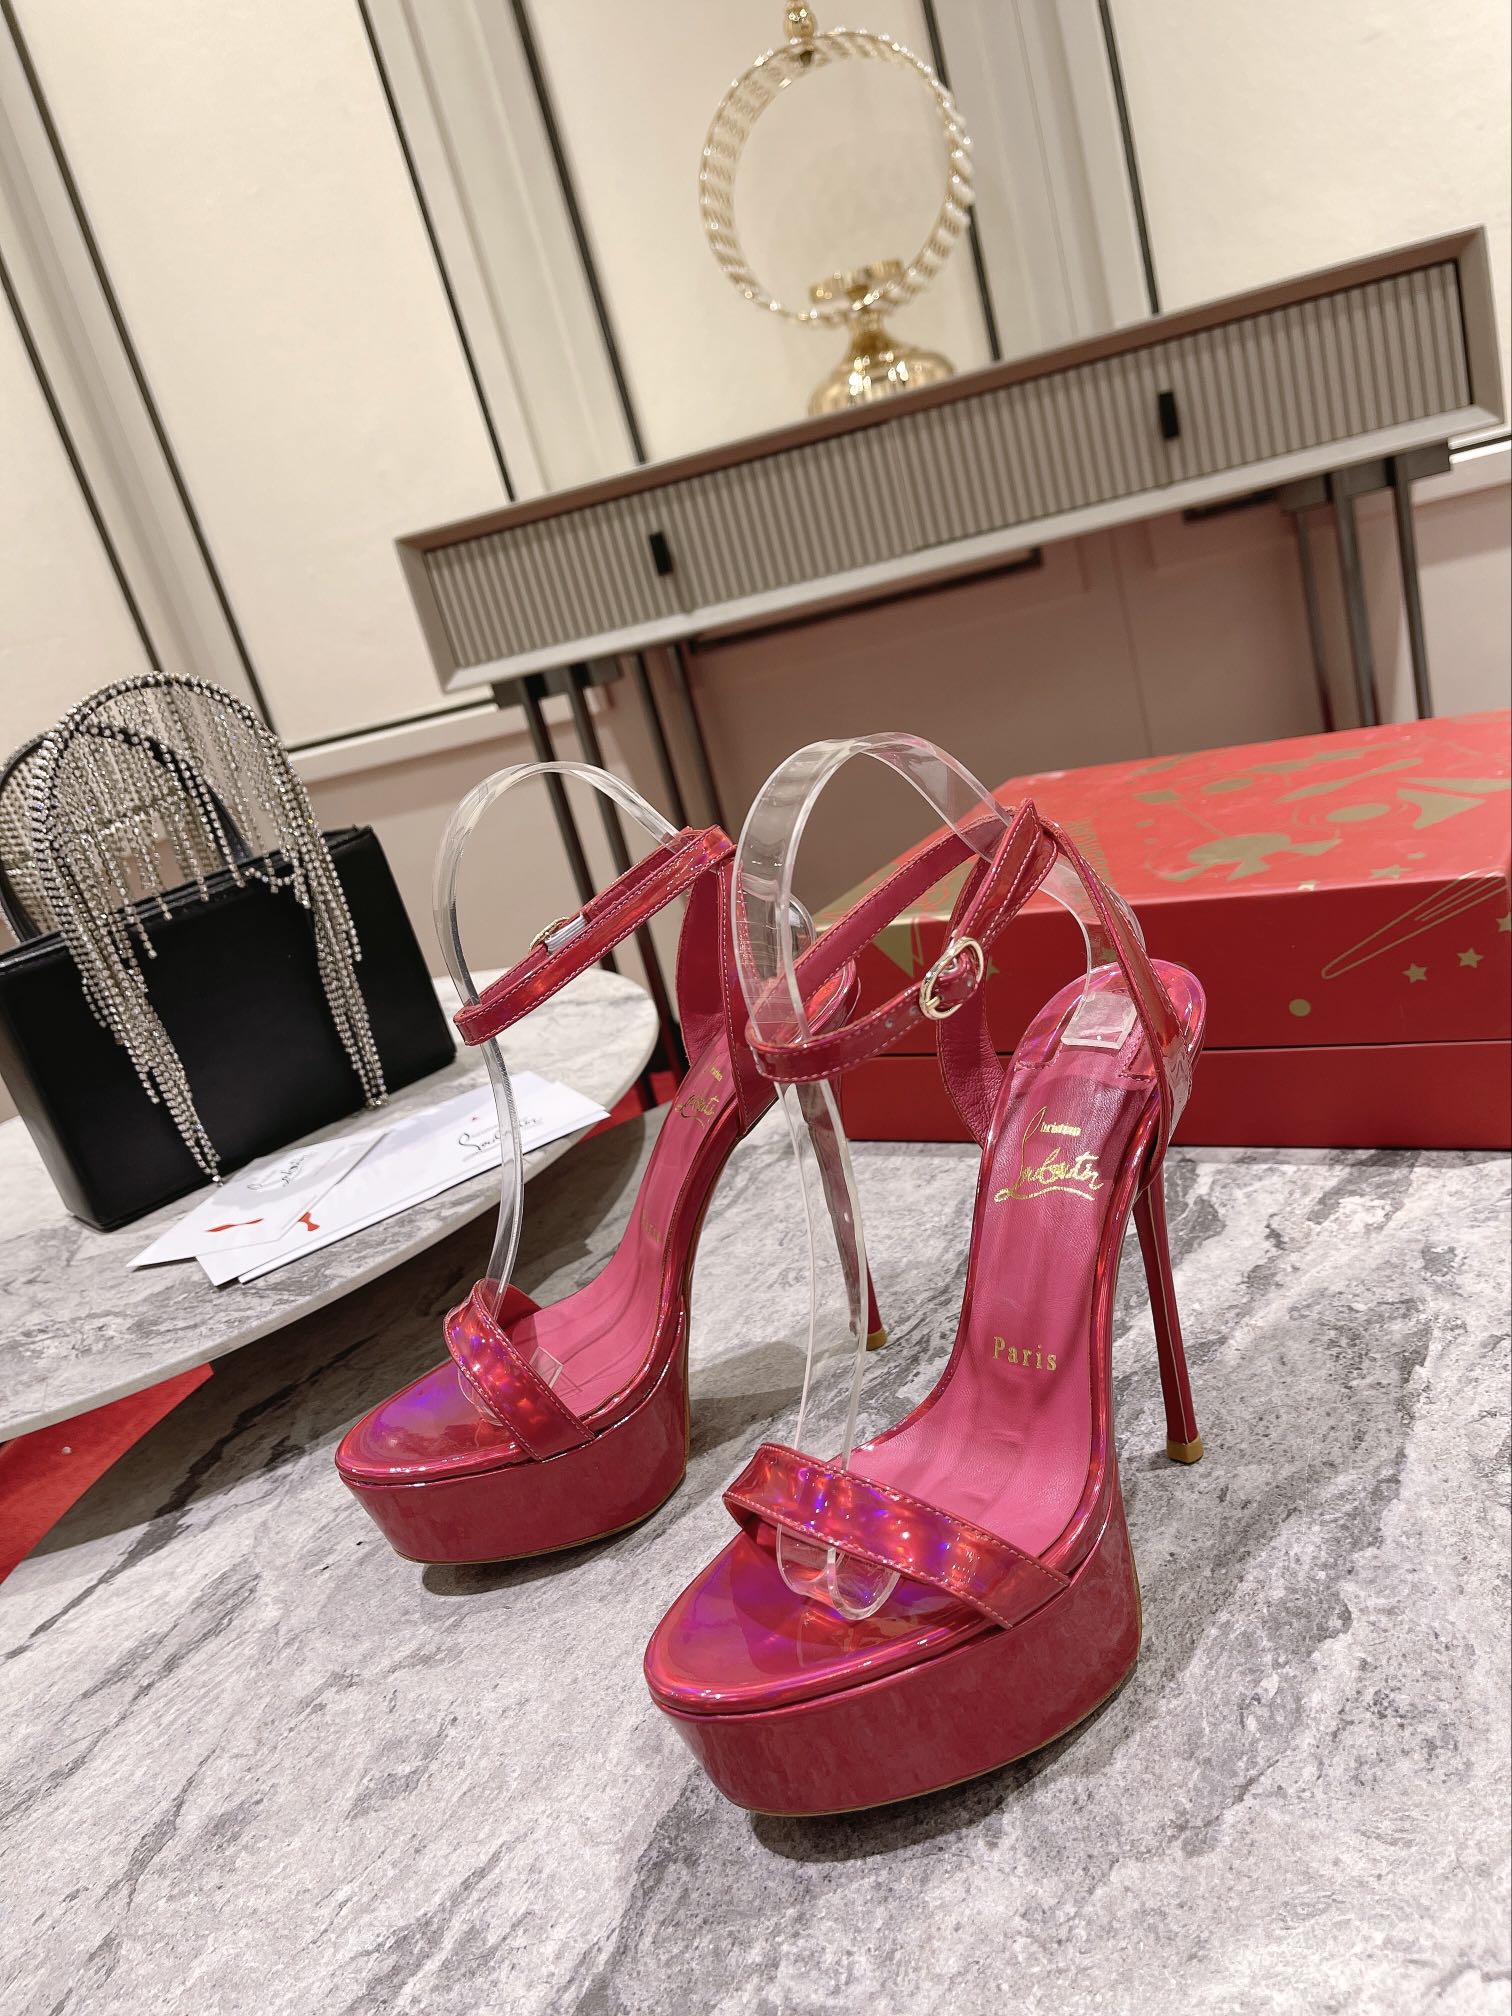 Christian Louboutin Shoes Sandals Black Pink Red Cowhide Patent Leather